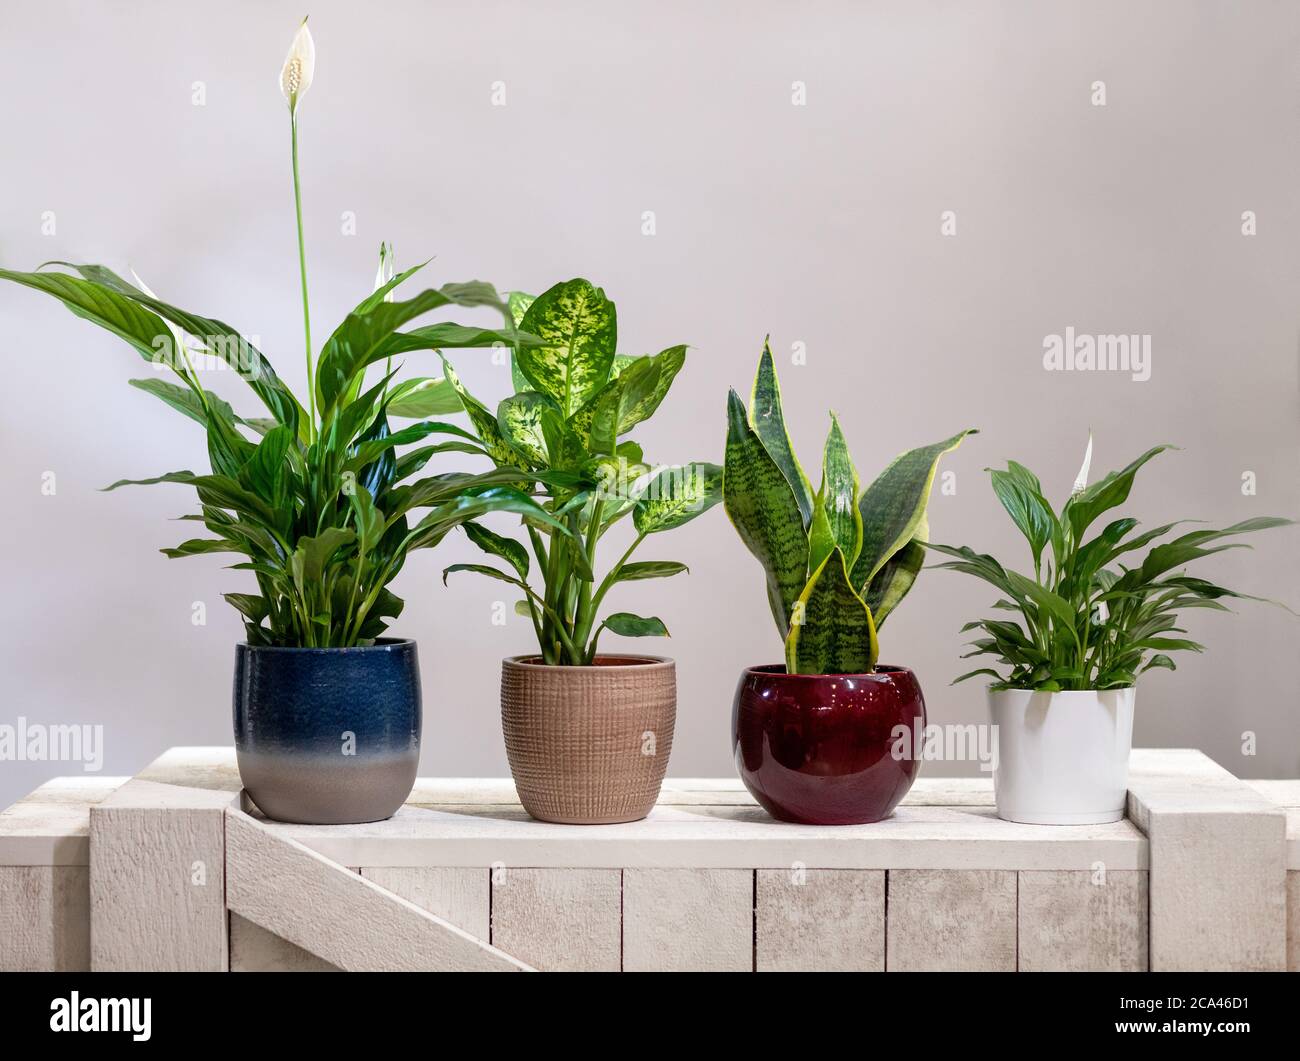 Peace Lily, Dieffenbachia Dumb canes, Mother-in-law's Tongue Viper's bowstring hemp snake plant Stock Photo